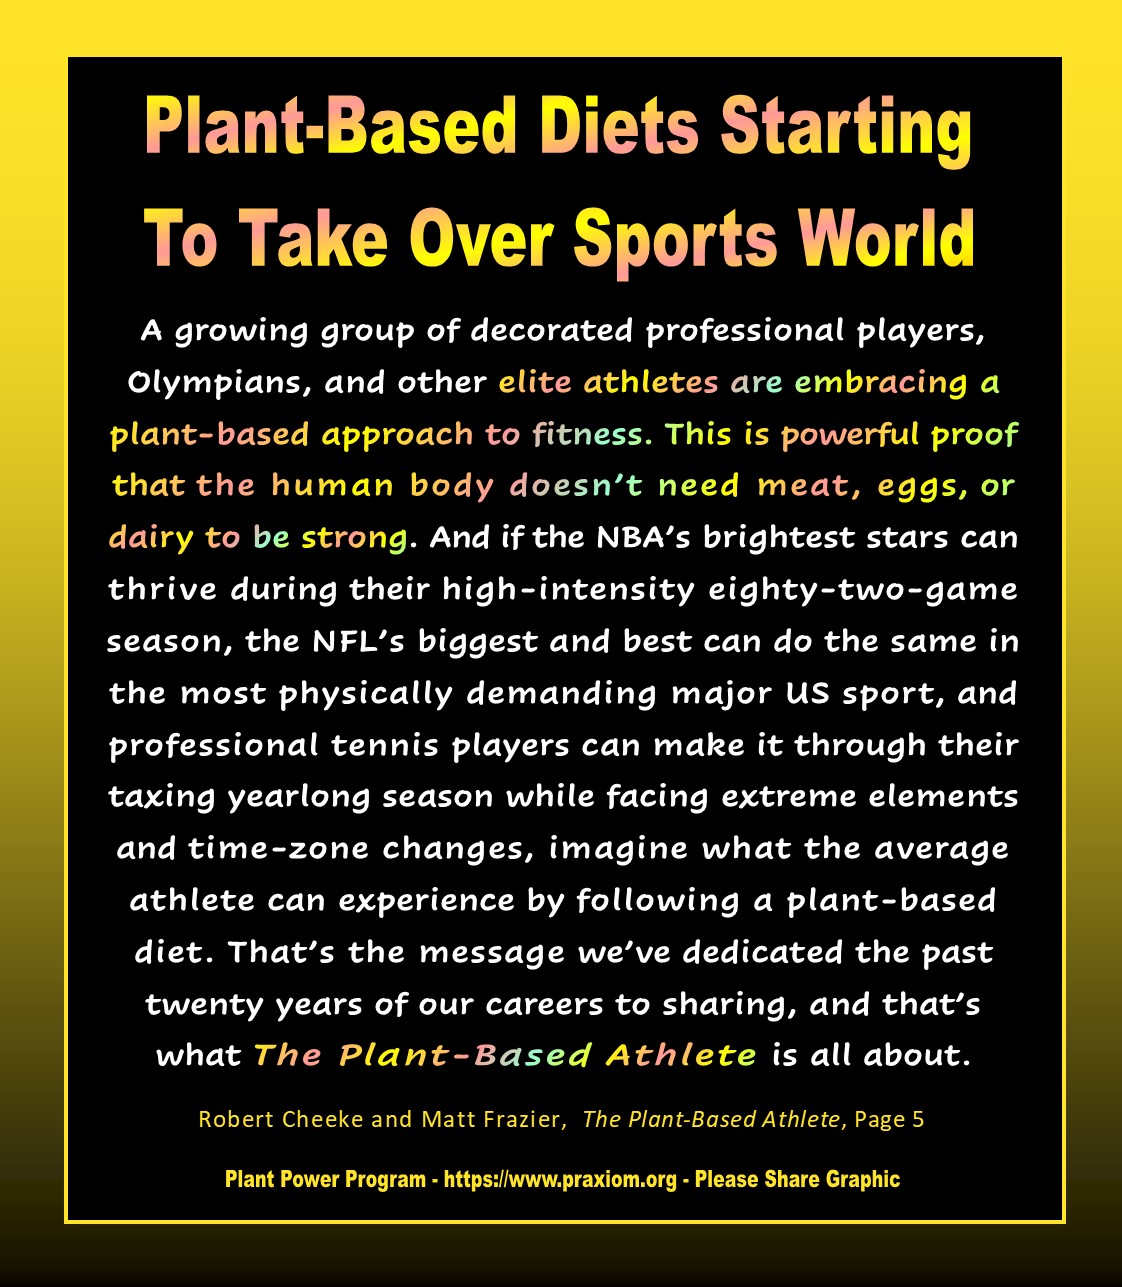 Plant Based Diets Take Over Sports World - Cheeke and Frazier